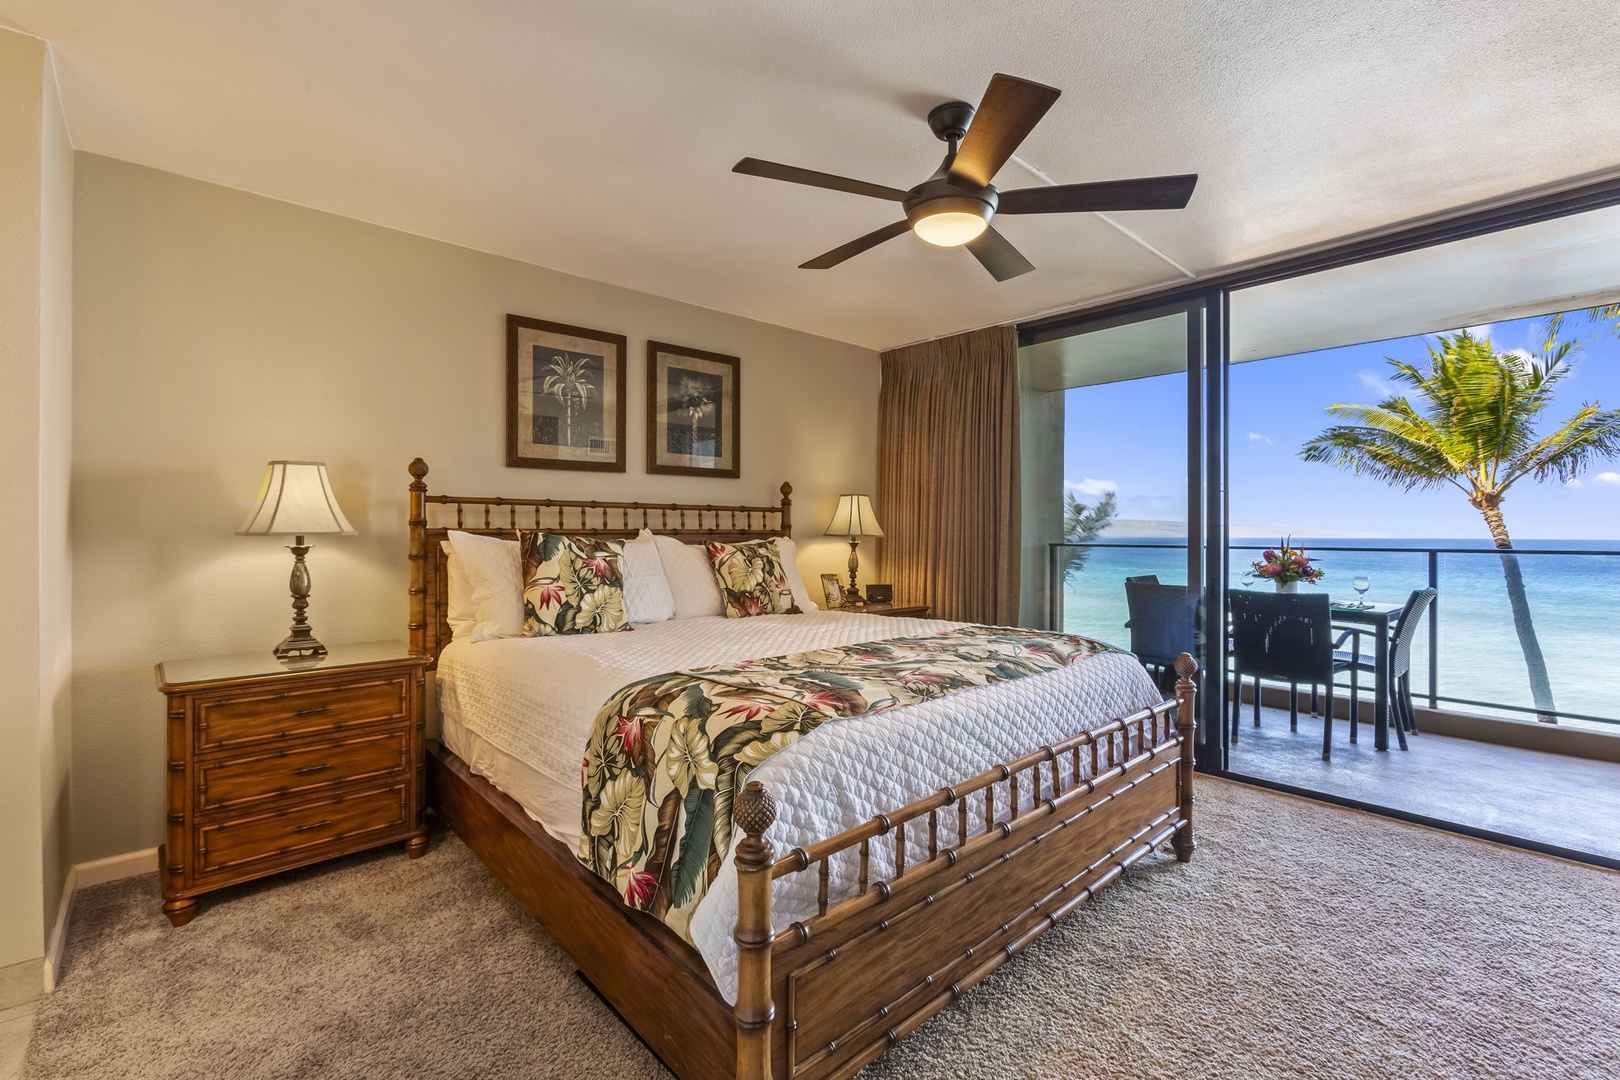 Bedroom with cal-king bed, lanai access, and ensuite